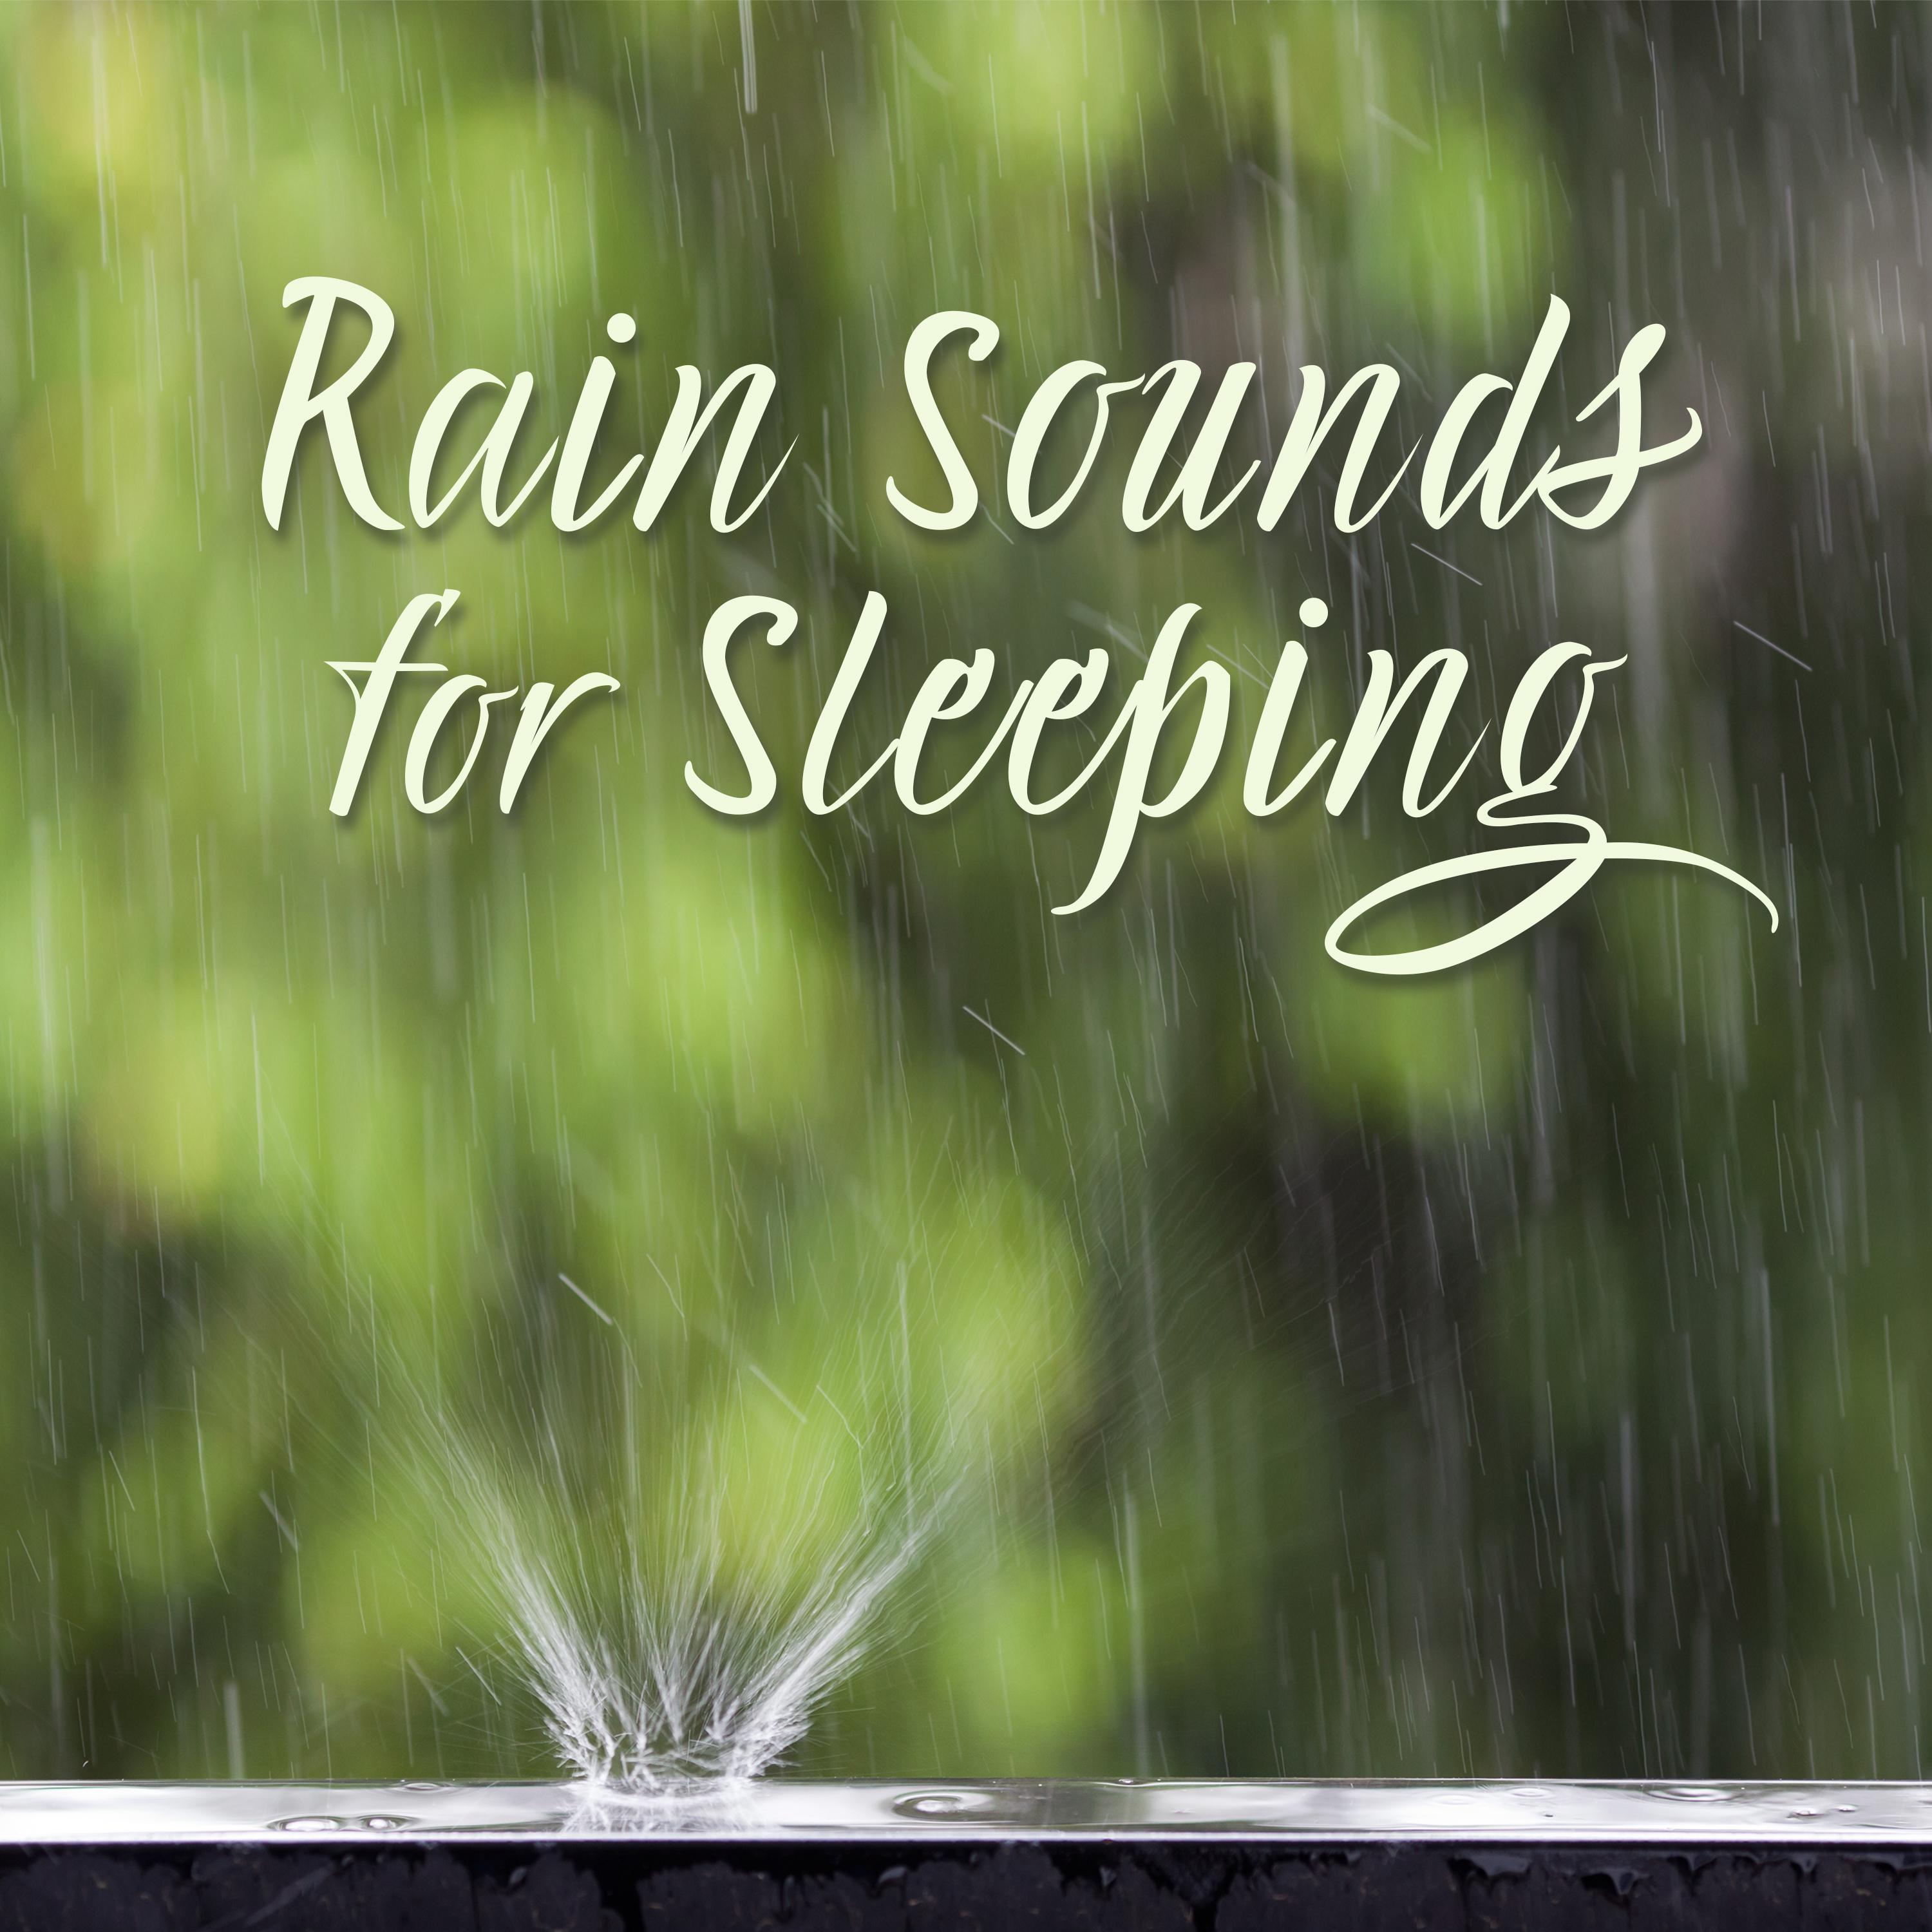 Rain Sounds for Sleeping (Best Selection of Relaxing Background Music, Gentle Night Rain for Insomnia, Meditation, Peace, Spa, Yoga)